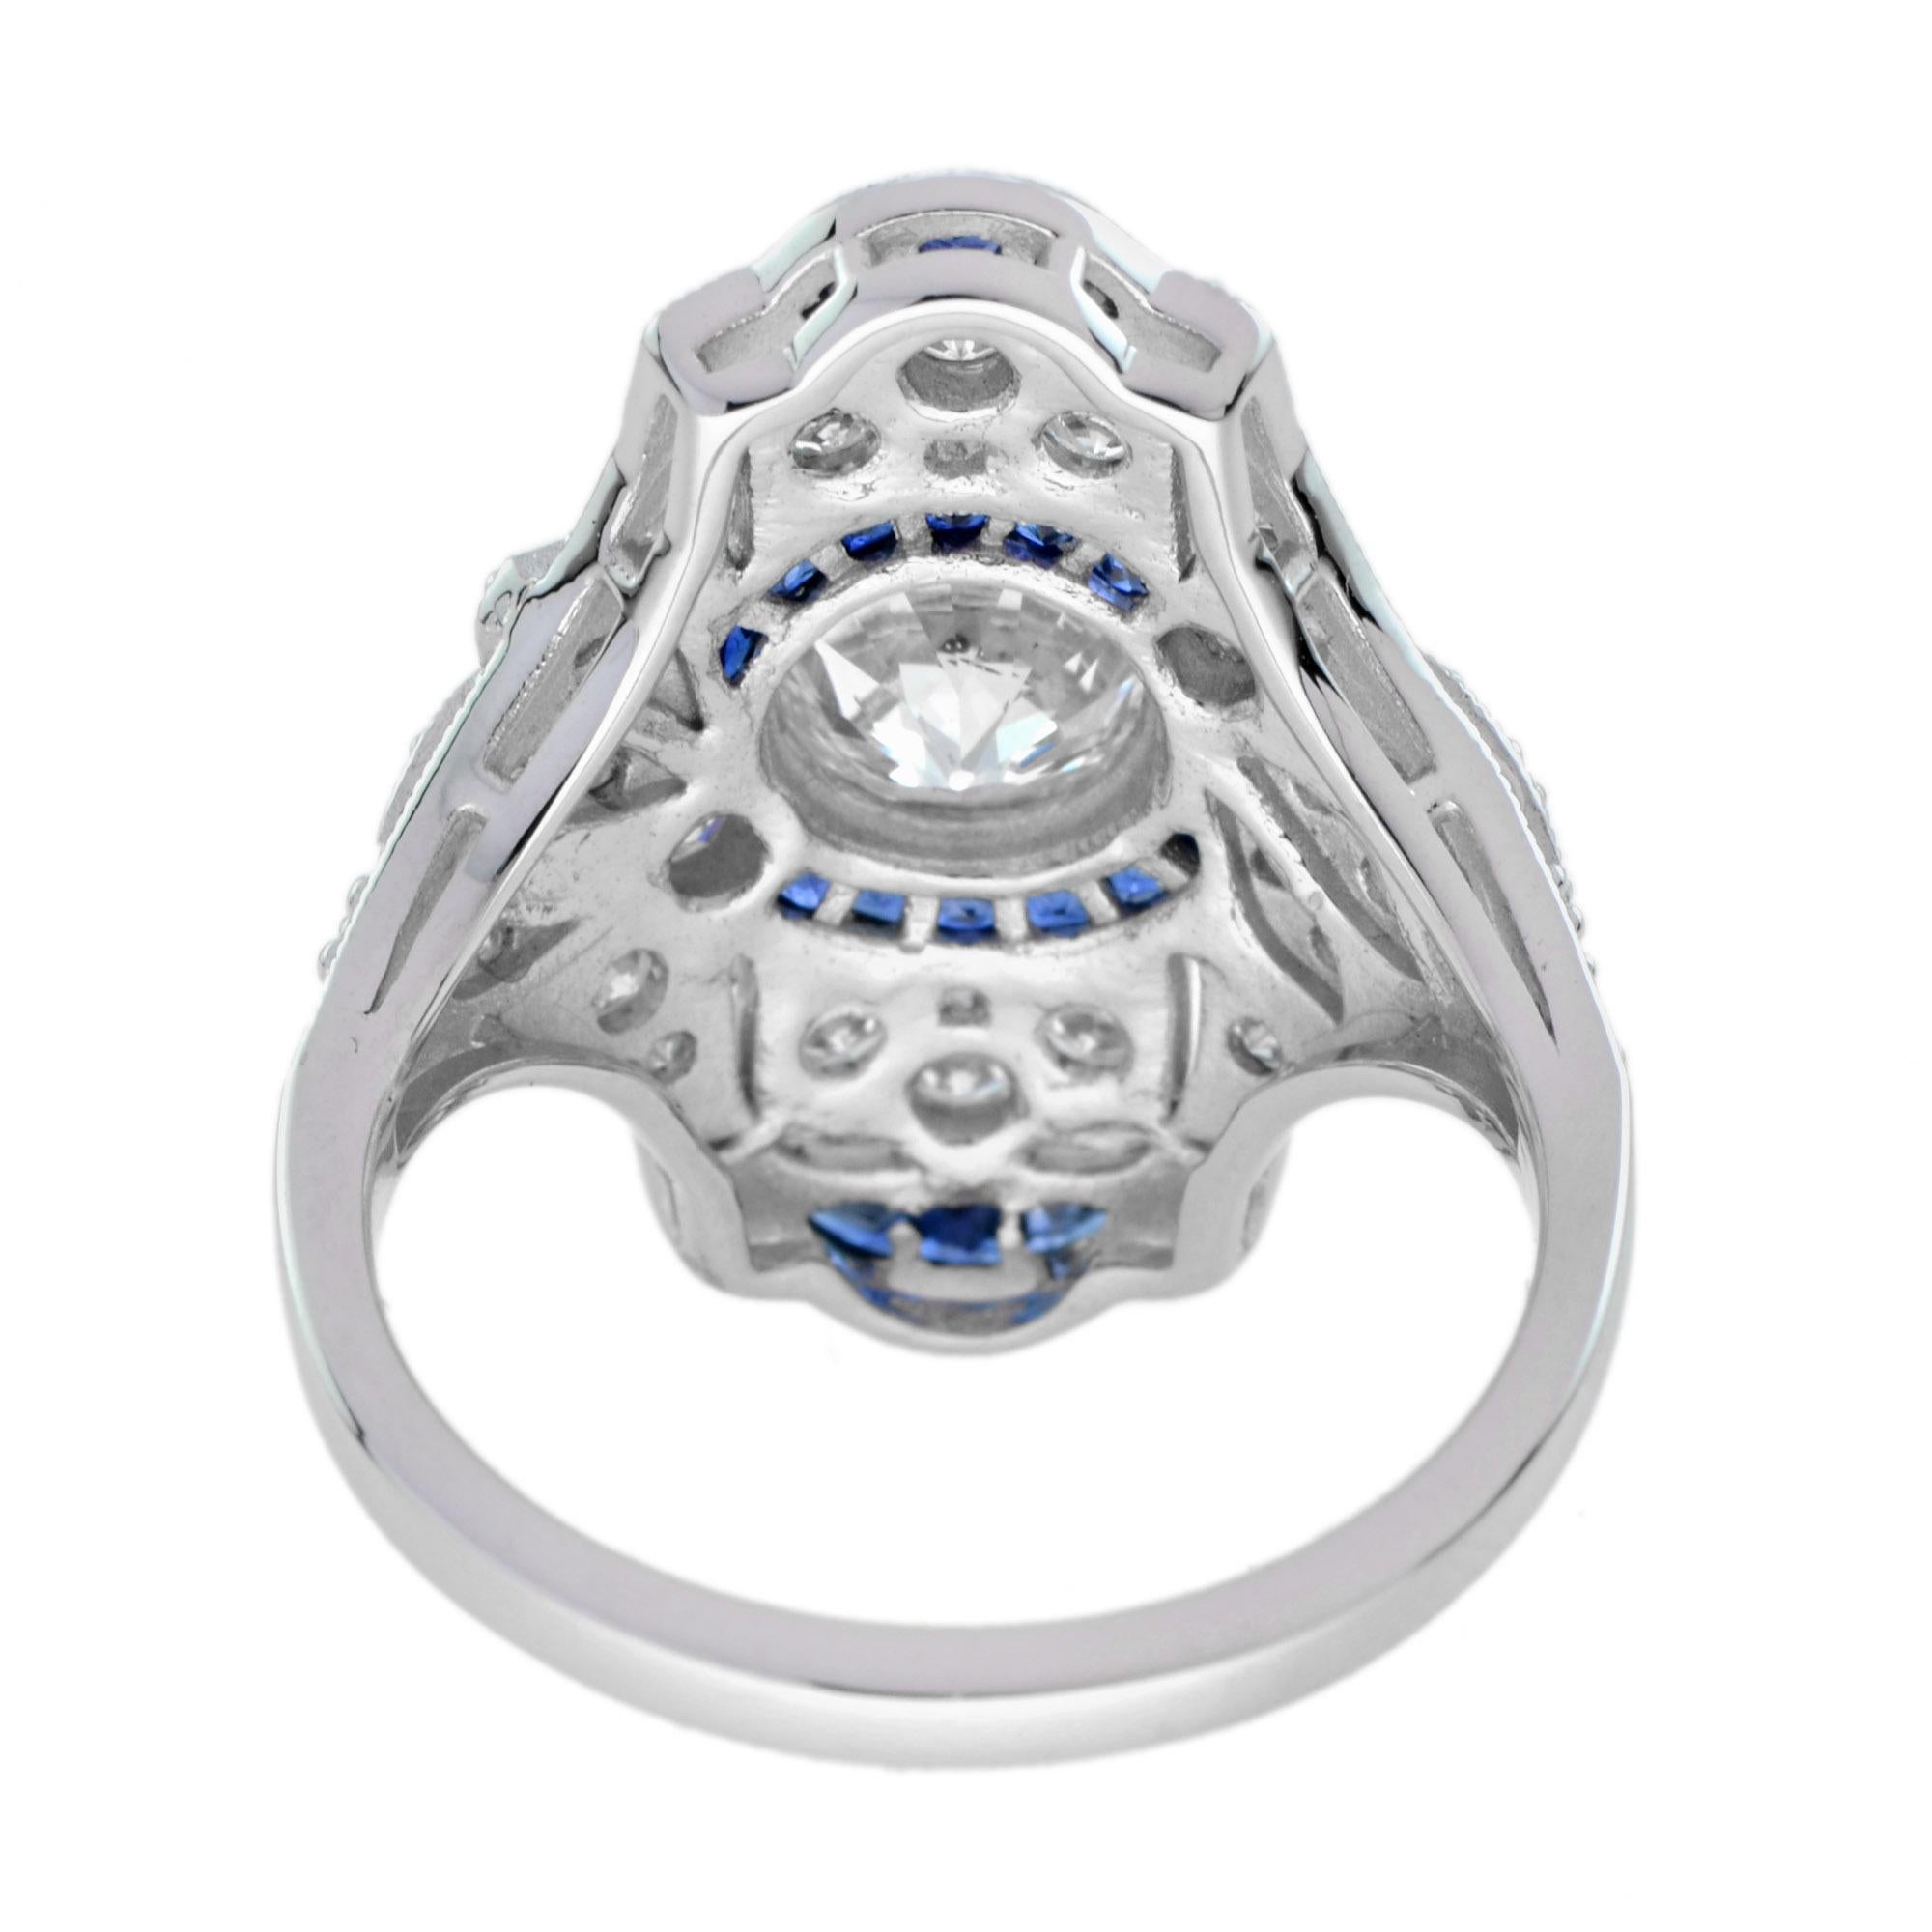 GIA Old Cut Diamond and Sapphire Art Deco Style Dinner Ring in 18k White Gold 1